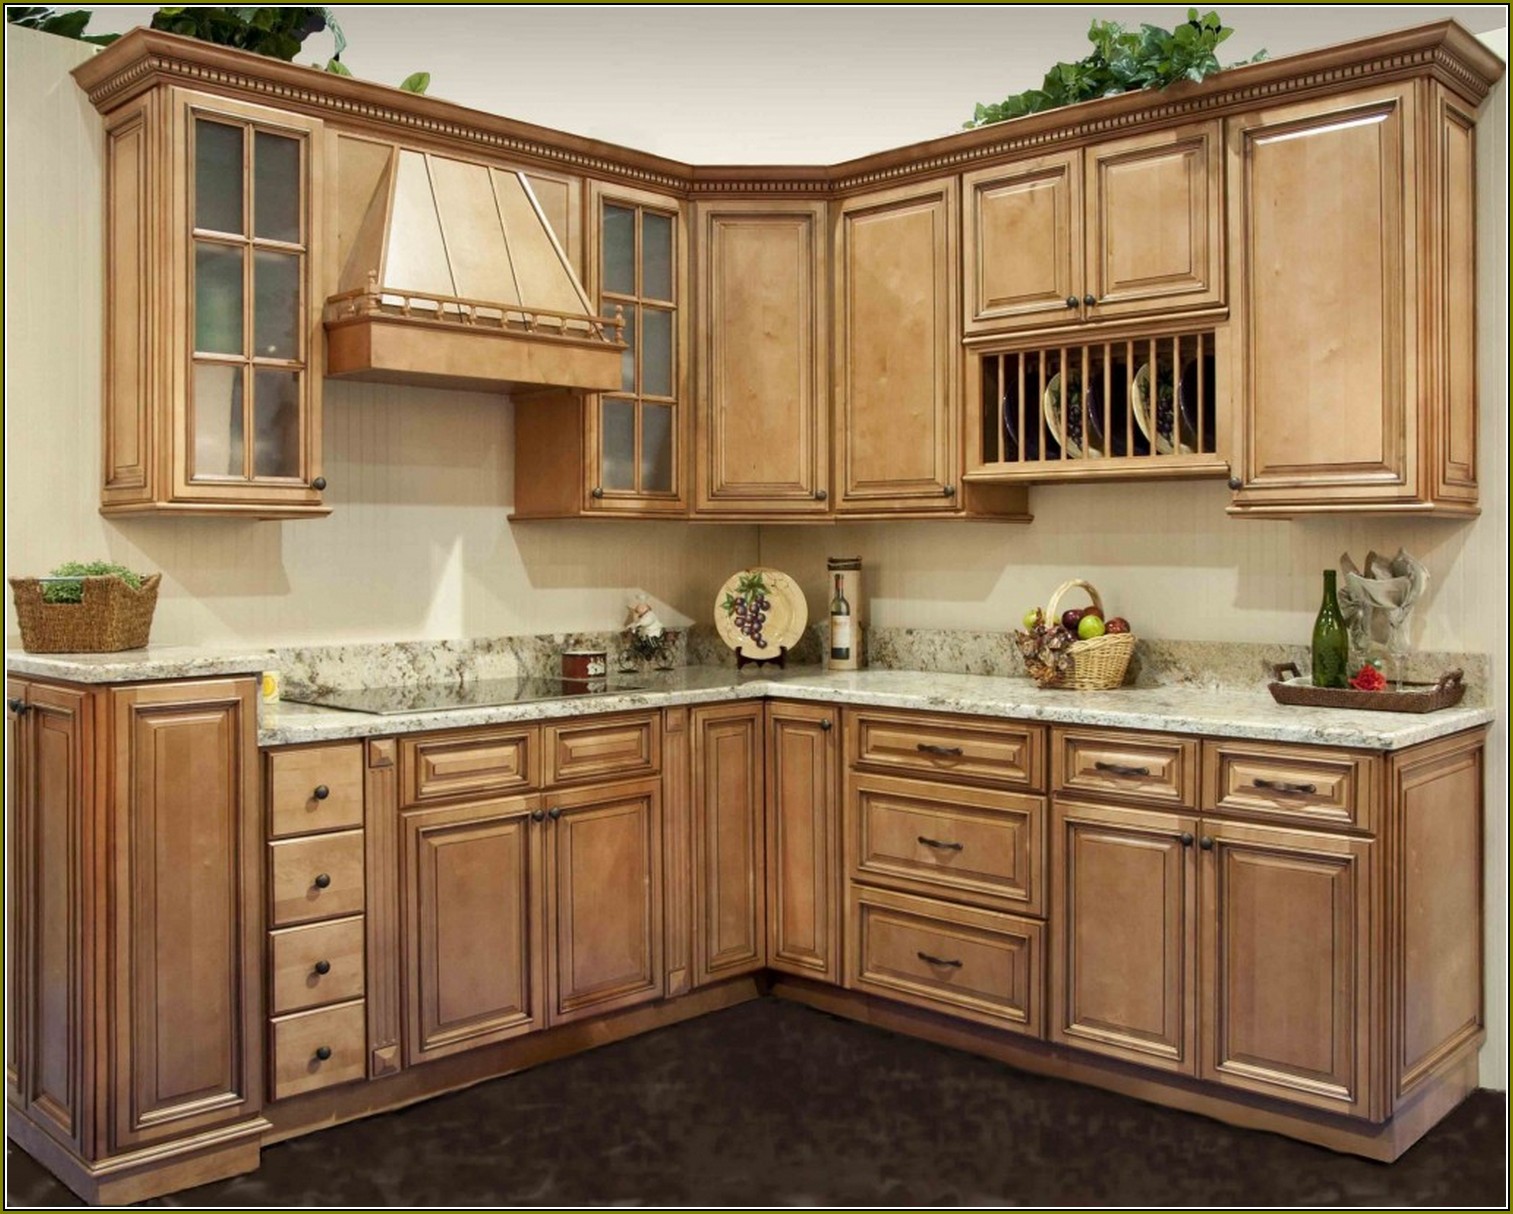 Updating Kitchen Cabinets With Molding